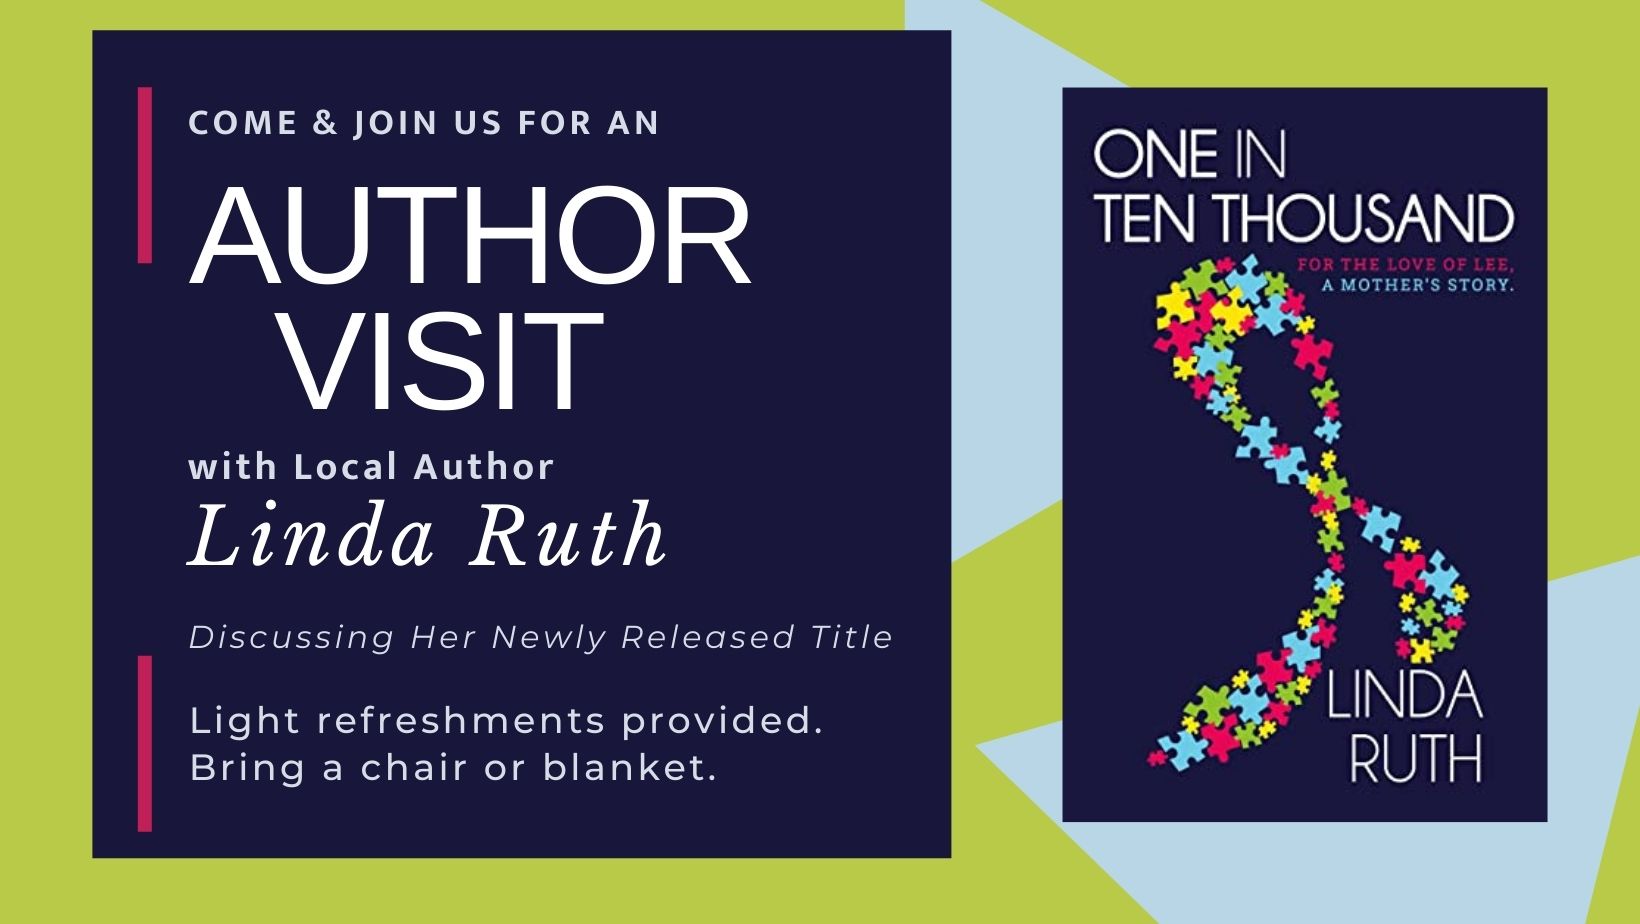 announcement of author Linda Ruth's visit with cover of her book One in Ten Thousand which includes an multi-colored autism ribbon